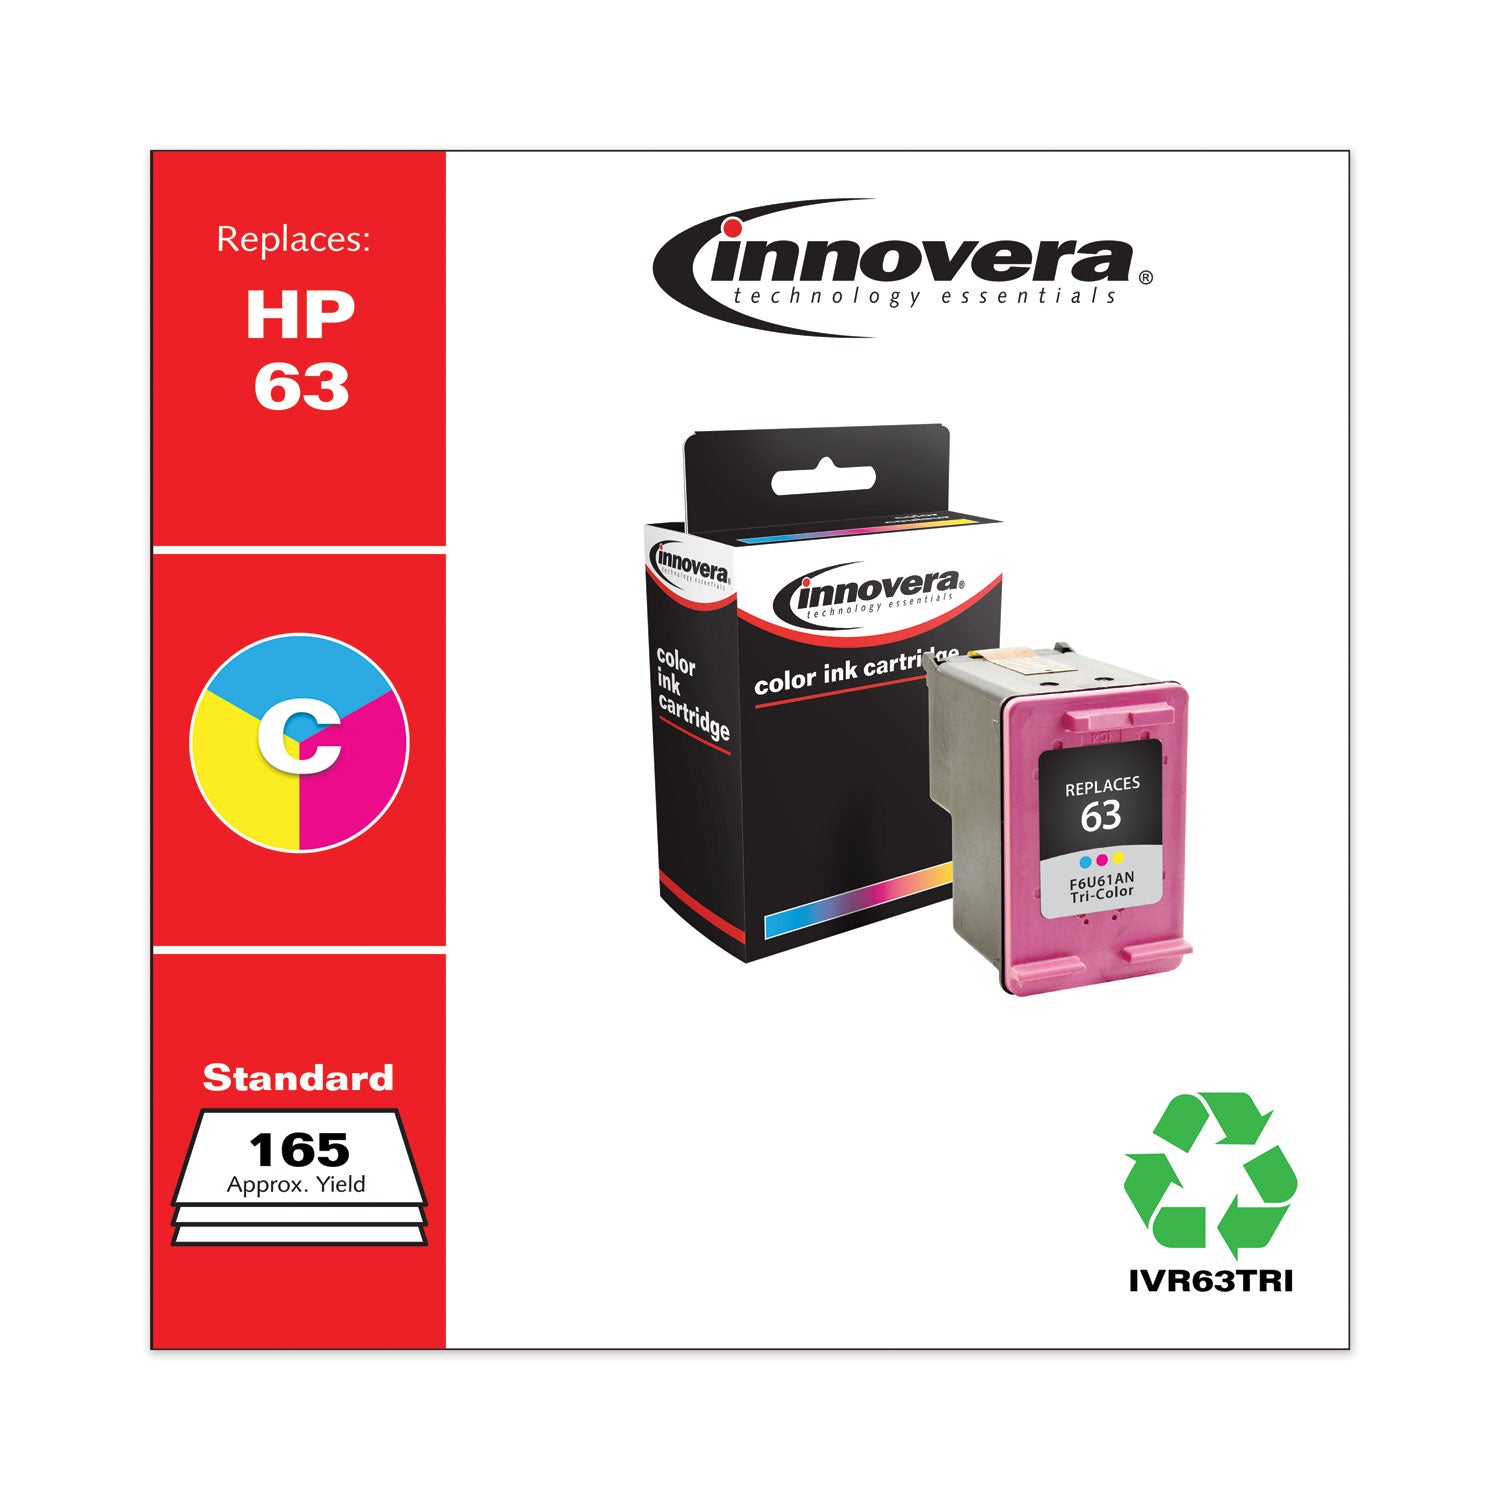 remanufactured-tri-color-ink-replacement-for-63-f6u61an-165-page-yield_ivr63tri - 2